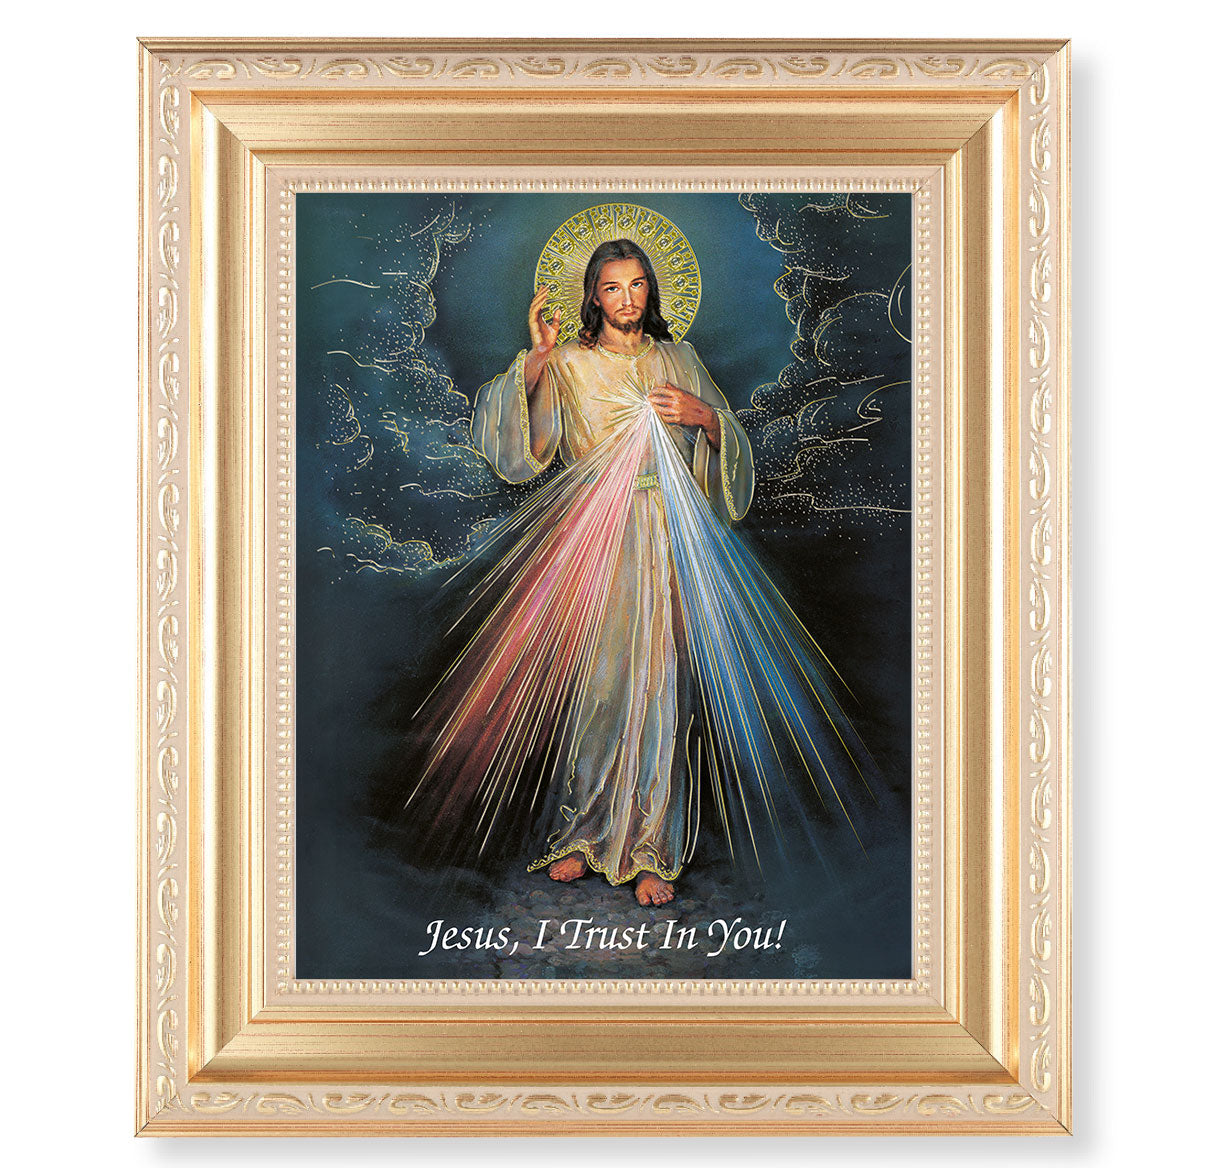 Divine Mercy Picture Framed Wall Art Decor, Large, Satin Gold Fluted Frame with Distressed Finish and Fine Detailed Scrollwork